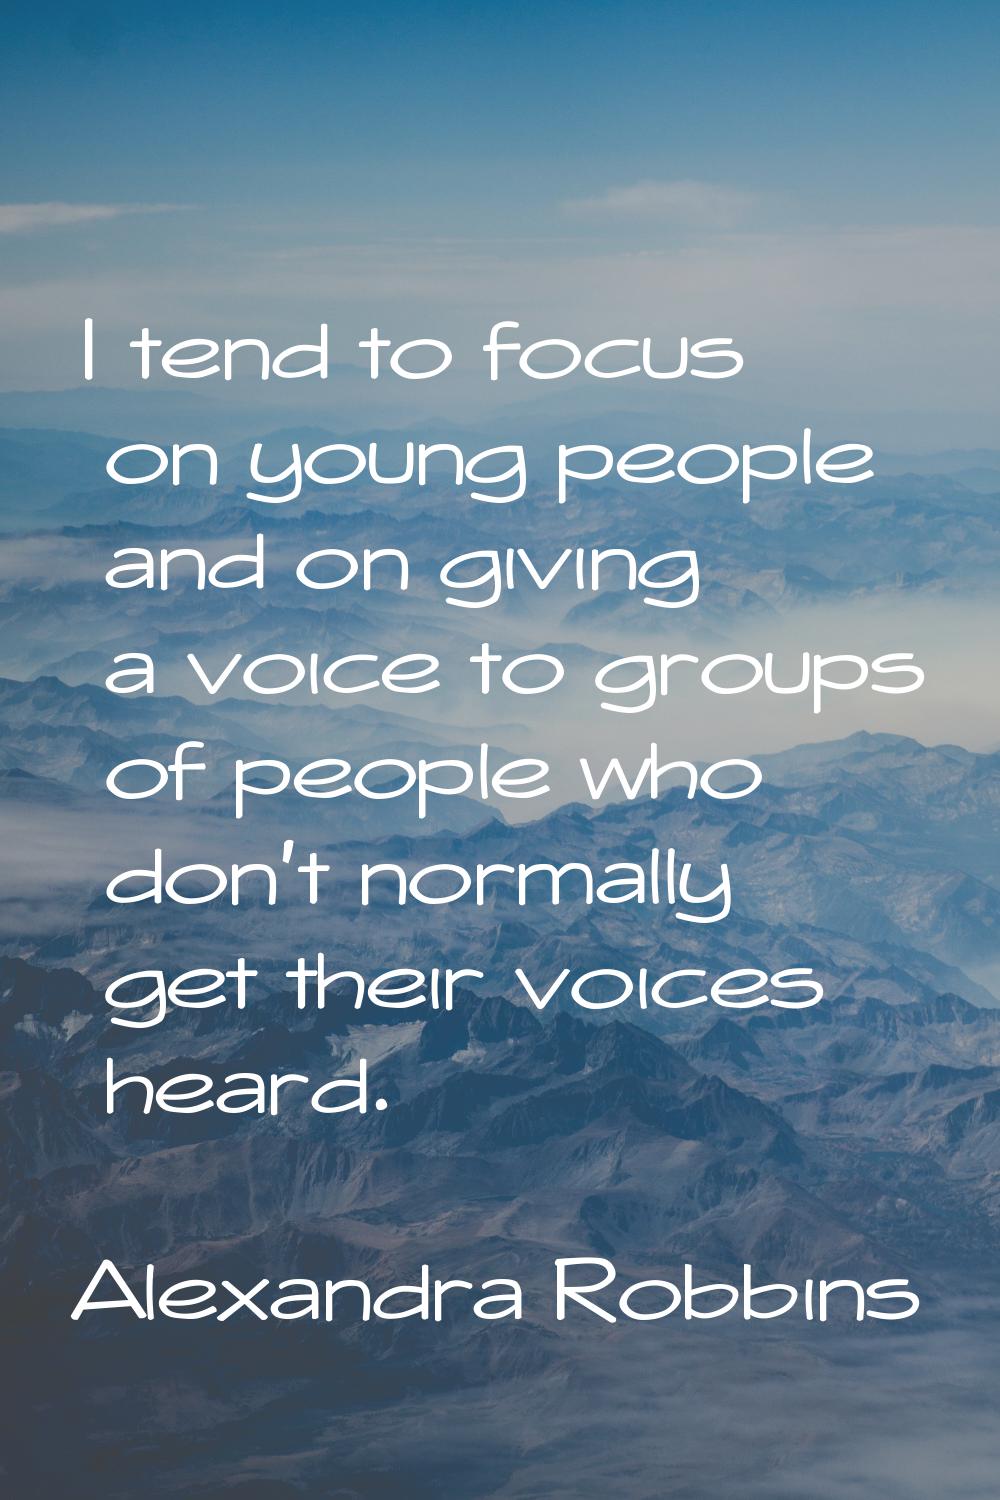 I tend to focus on young people and on giving a voice to groups of people who don't normally get th